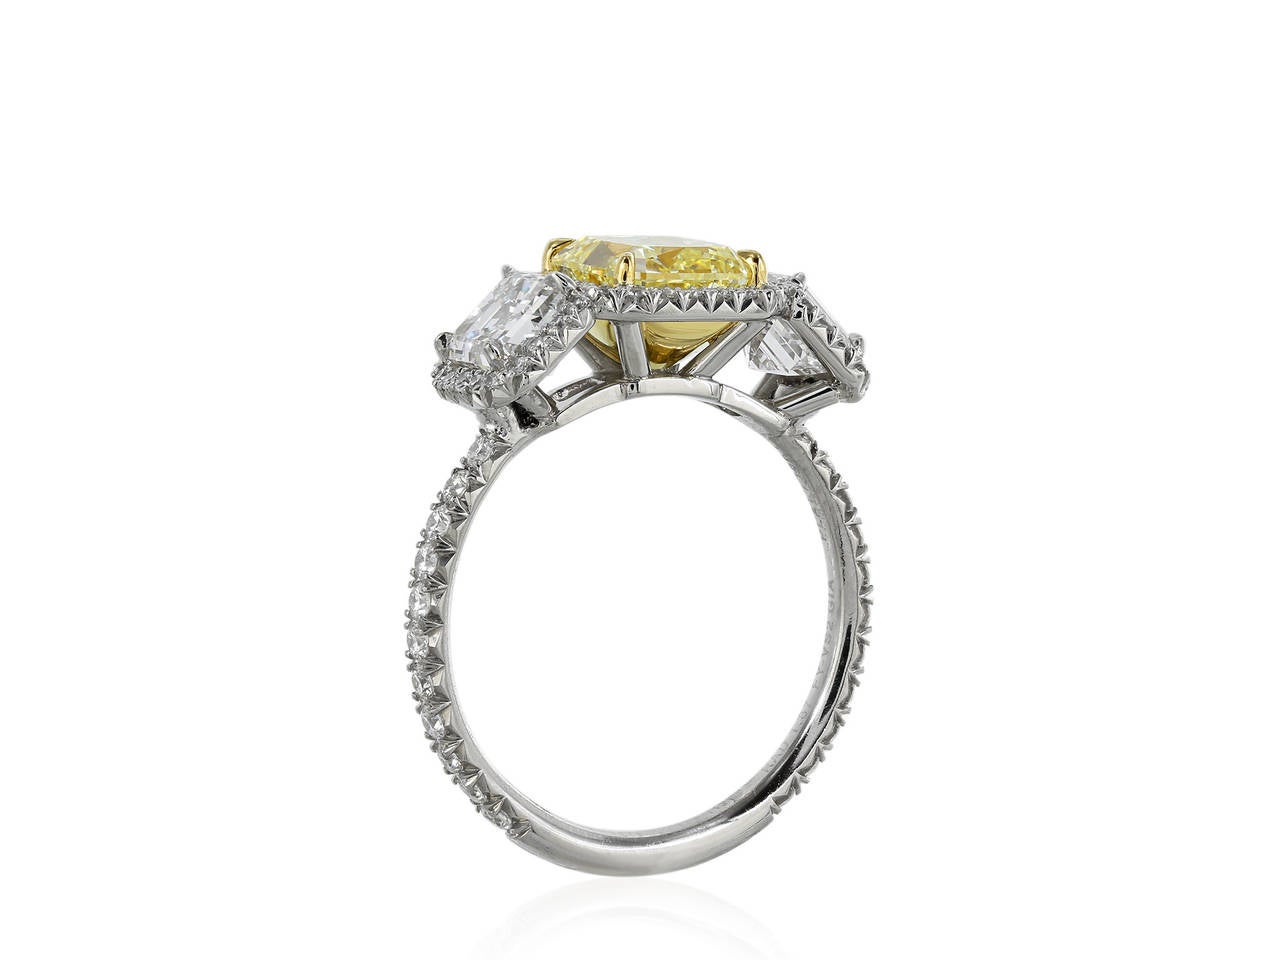 Contemporary 1.87 Carat GIA Certified Fancy Yellow Diamond Platinum Engagement Ring For Sale